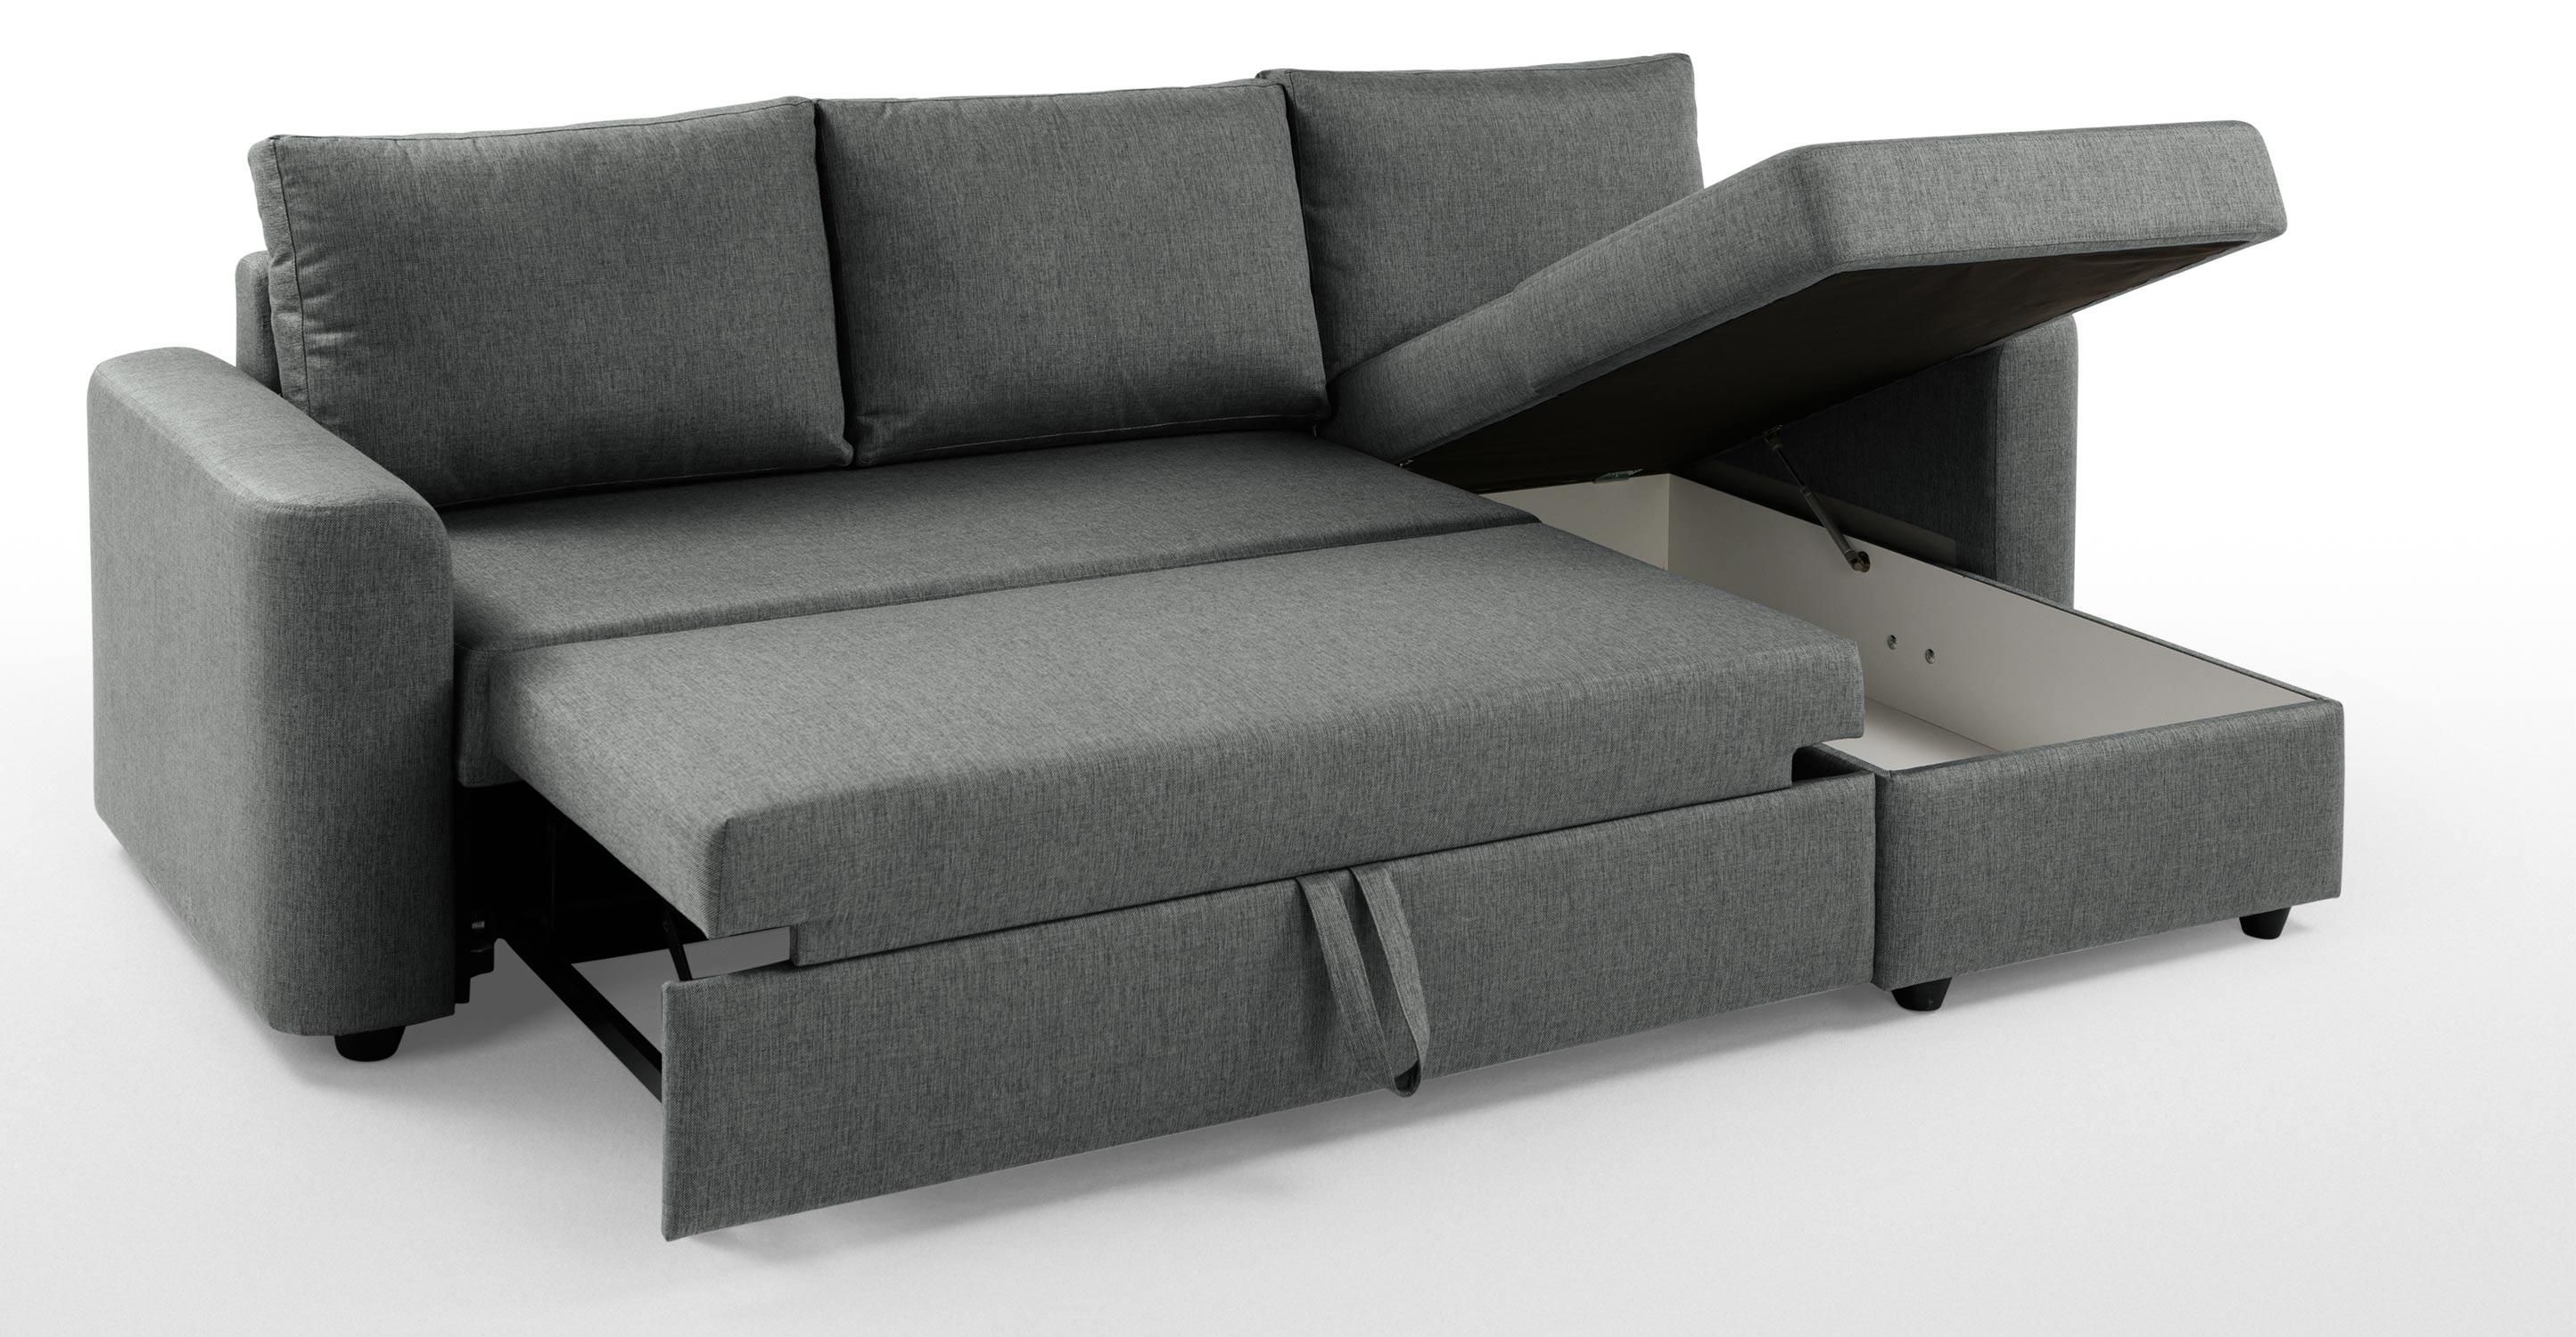 Featured Photo of The 20 Best Collection of Storage Sofa Beds